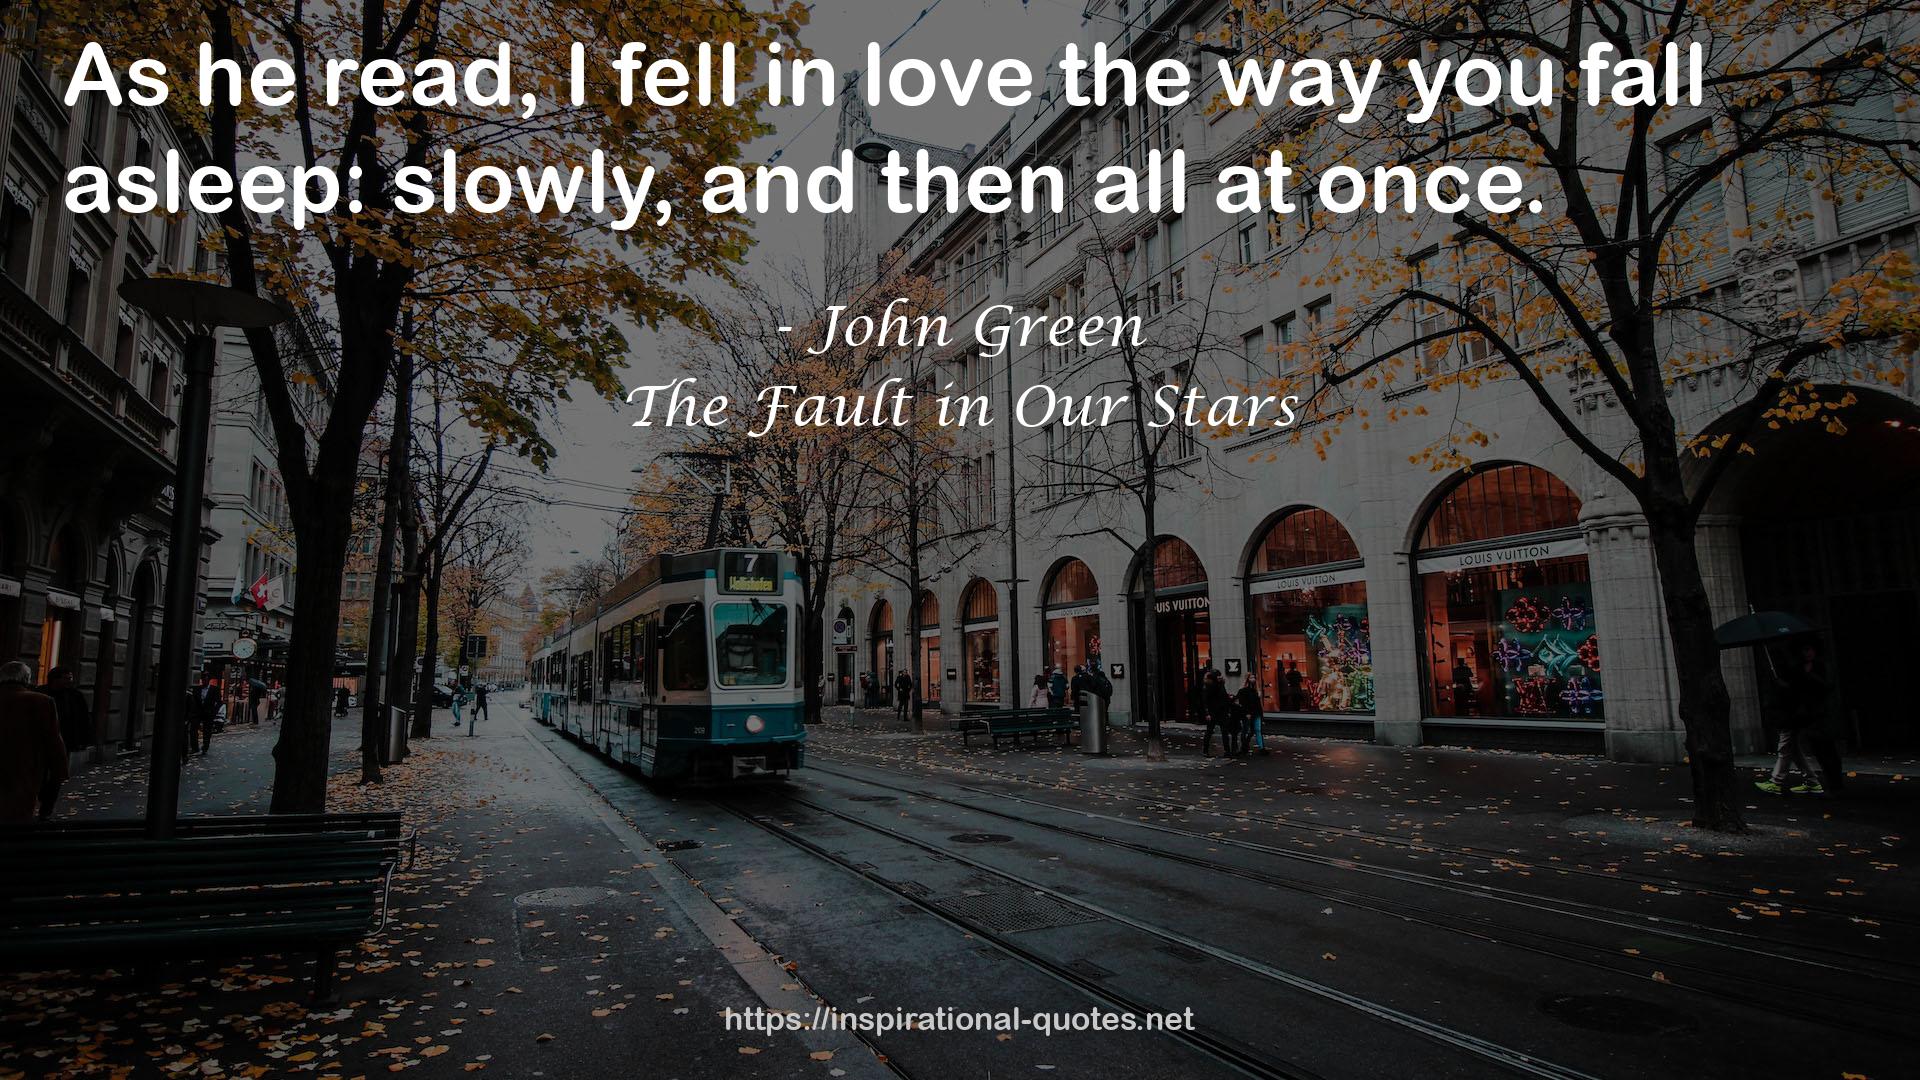 The Fault in Our Stars QUOTES